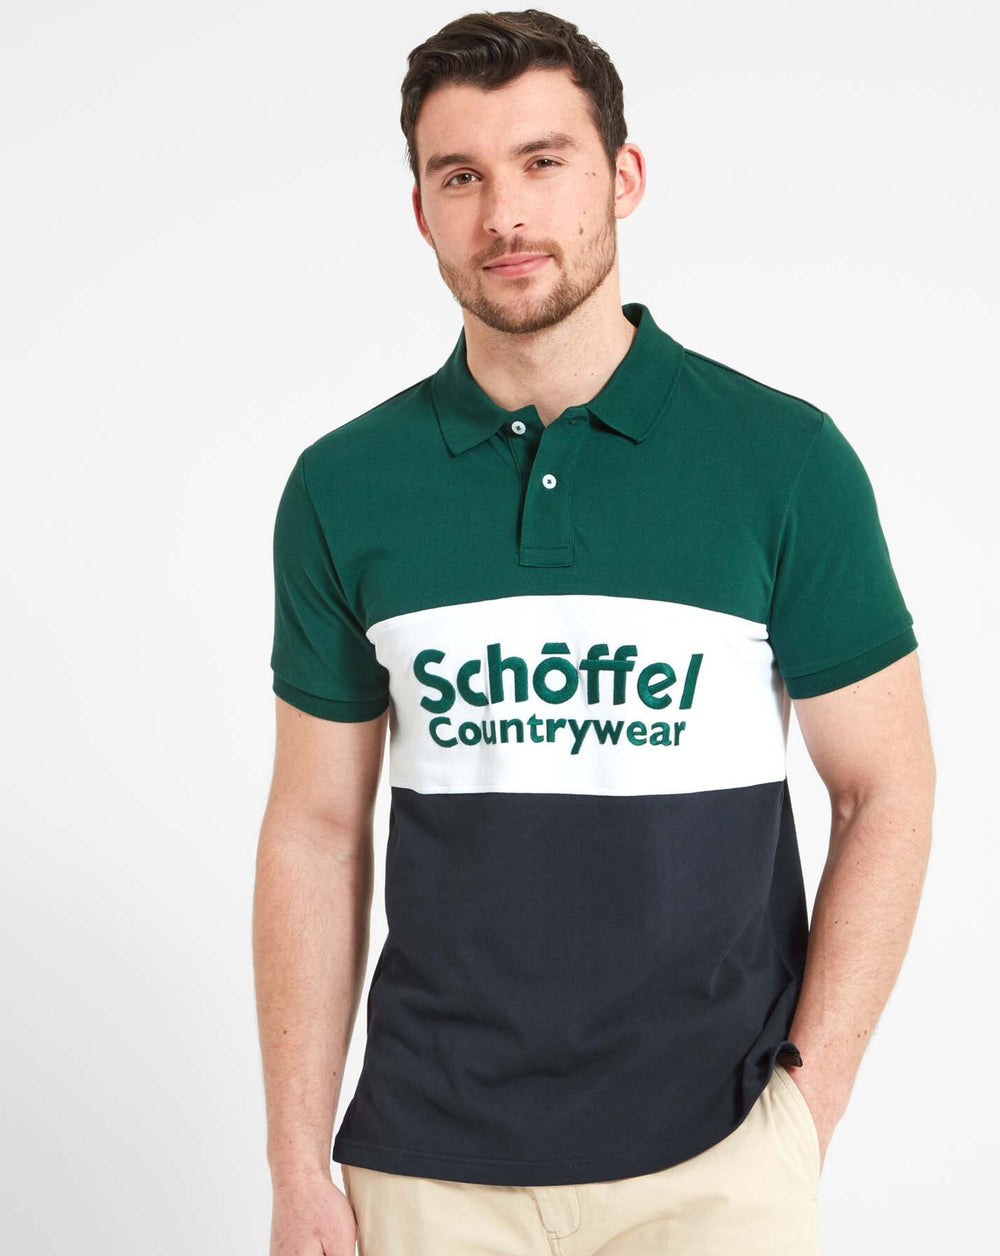 The Schoffel Mens Exeter Heritage Polo Shirt in Navy#Navy